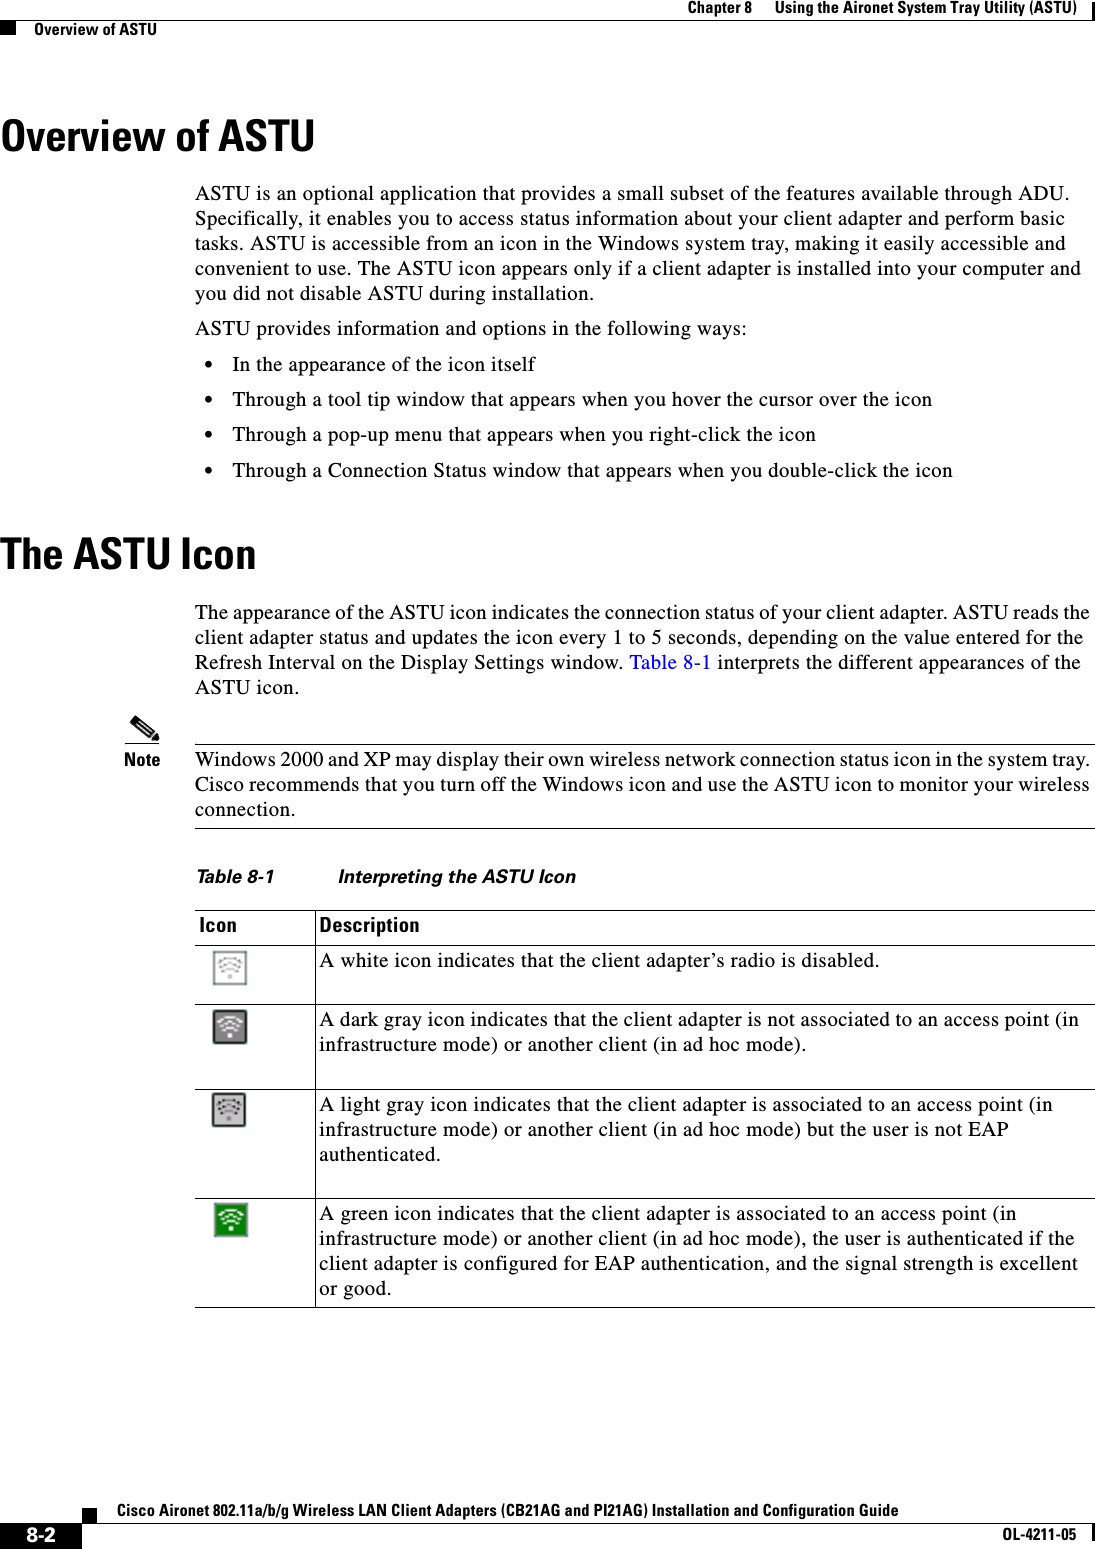 8-2Cisco Aironet 802.11a/b/g Wireless LAN Client Adapters (CB21AG and PI21AG) Installation and Configuration GuideOL-4211-05Chapter 8      Using the Aironet System Tray Utility (ASTU)Overview of ASTUOverview of ASTUASTU is an optional application that provides a small subset of the features available through ADU. Specifically, it enables you to access status information about your client adapter and perform basic tasks. ASTU is accessible from an icon in the Windows system tray, making it easily accessible and convenient to use. The ASTU icon appears only if a client adapter is installed into your computer and you did not disable ASTU during installation.ASTU provides information and options in the following ways:•In the appearance of the icon itself•Through a tool tip window that appears when you hover the cursor over the icon•Through a pop-up menu that appears when you right-click the icon•Through a Connection Status window that appears when you double-click the iconThe ASTU IconThe appearance of the ASTU icon indicates the connection status of your client adapter. ASTU reads the client adapter status and updates the icon every 1 to 5 seconds, depending on the value entered for the Refresh Interval on the Display Settings window. Table 8-1 interprets the different appearances of the ASTU icon.Note Windows 2000 and XP may display their own wireless network connection status icon in the system tray. Cisco recommends that you turn off the Windows icon and use the ASTU icon to monitor your wireless connection.Table 8-1 Interpreting the ASTU IconIcon DescriptionA white icon indicates that the client adapter’s radio is disabled.A dark gray icon indicates that the client adapter is not associated to an access point (in infrastructure mode) or another client (in ad hoc mode).A light gray icon indicates that the client adapter is associated to an access point (in infrastructure mode) or another client (in ad hoc mode) but the user is not EAP authenticated.A green icon indicates that the client adapter is associated to an access point (in infrastructure mode) or another client (in ad hoc mode), the user is authenticated if the client adapter is configured for EAP authentication, and the signal strength is excellent or good.